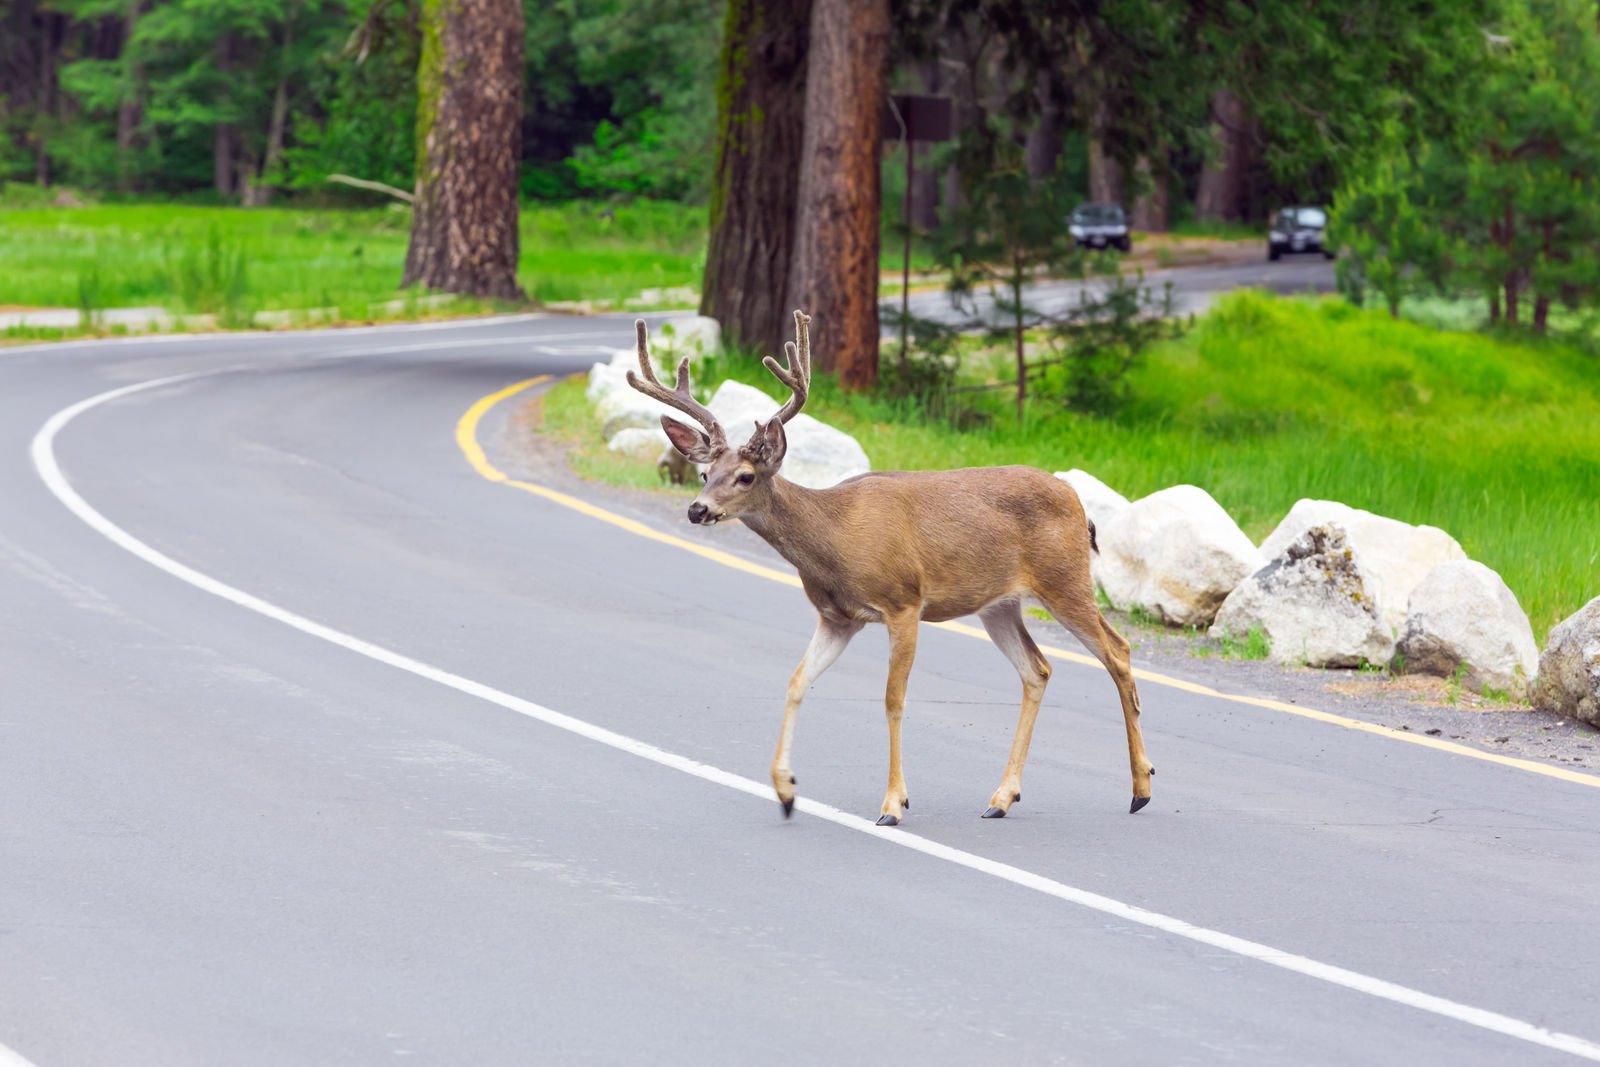 Will my car insurance go up if I hit a deer with my car?